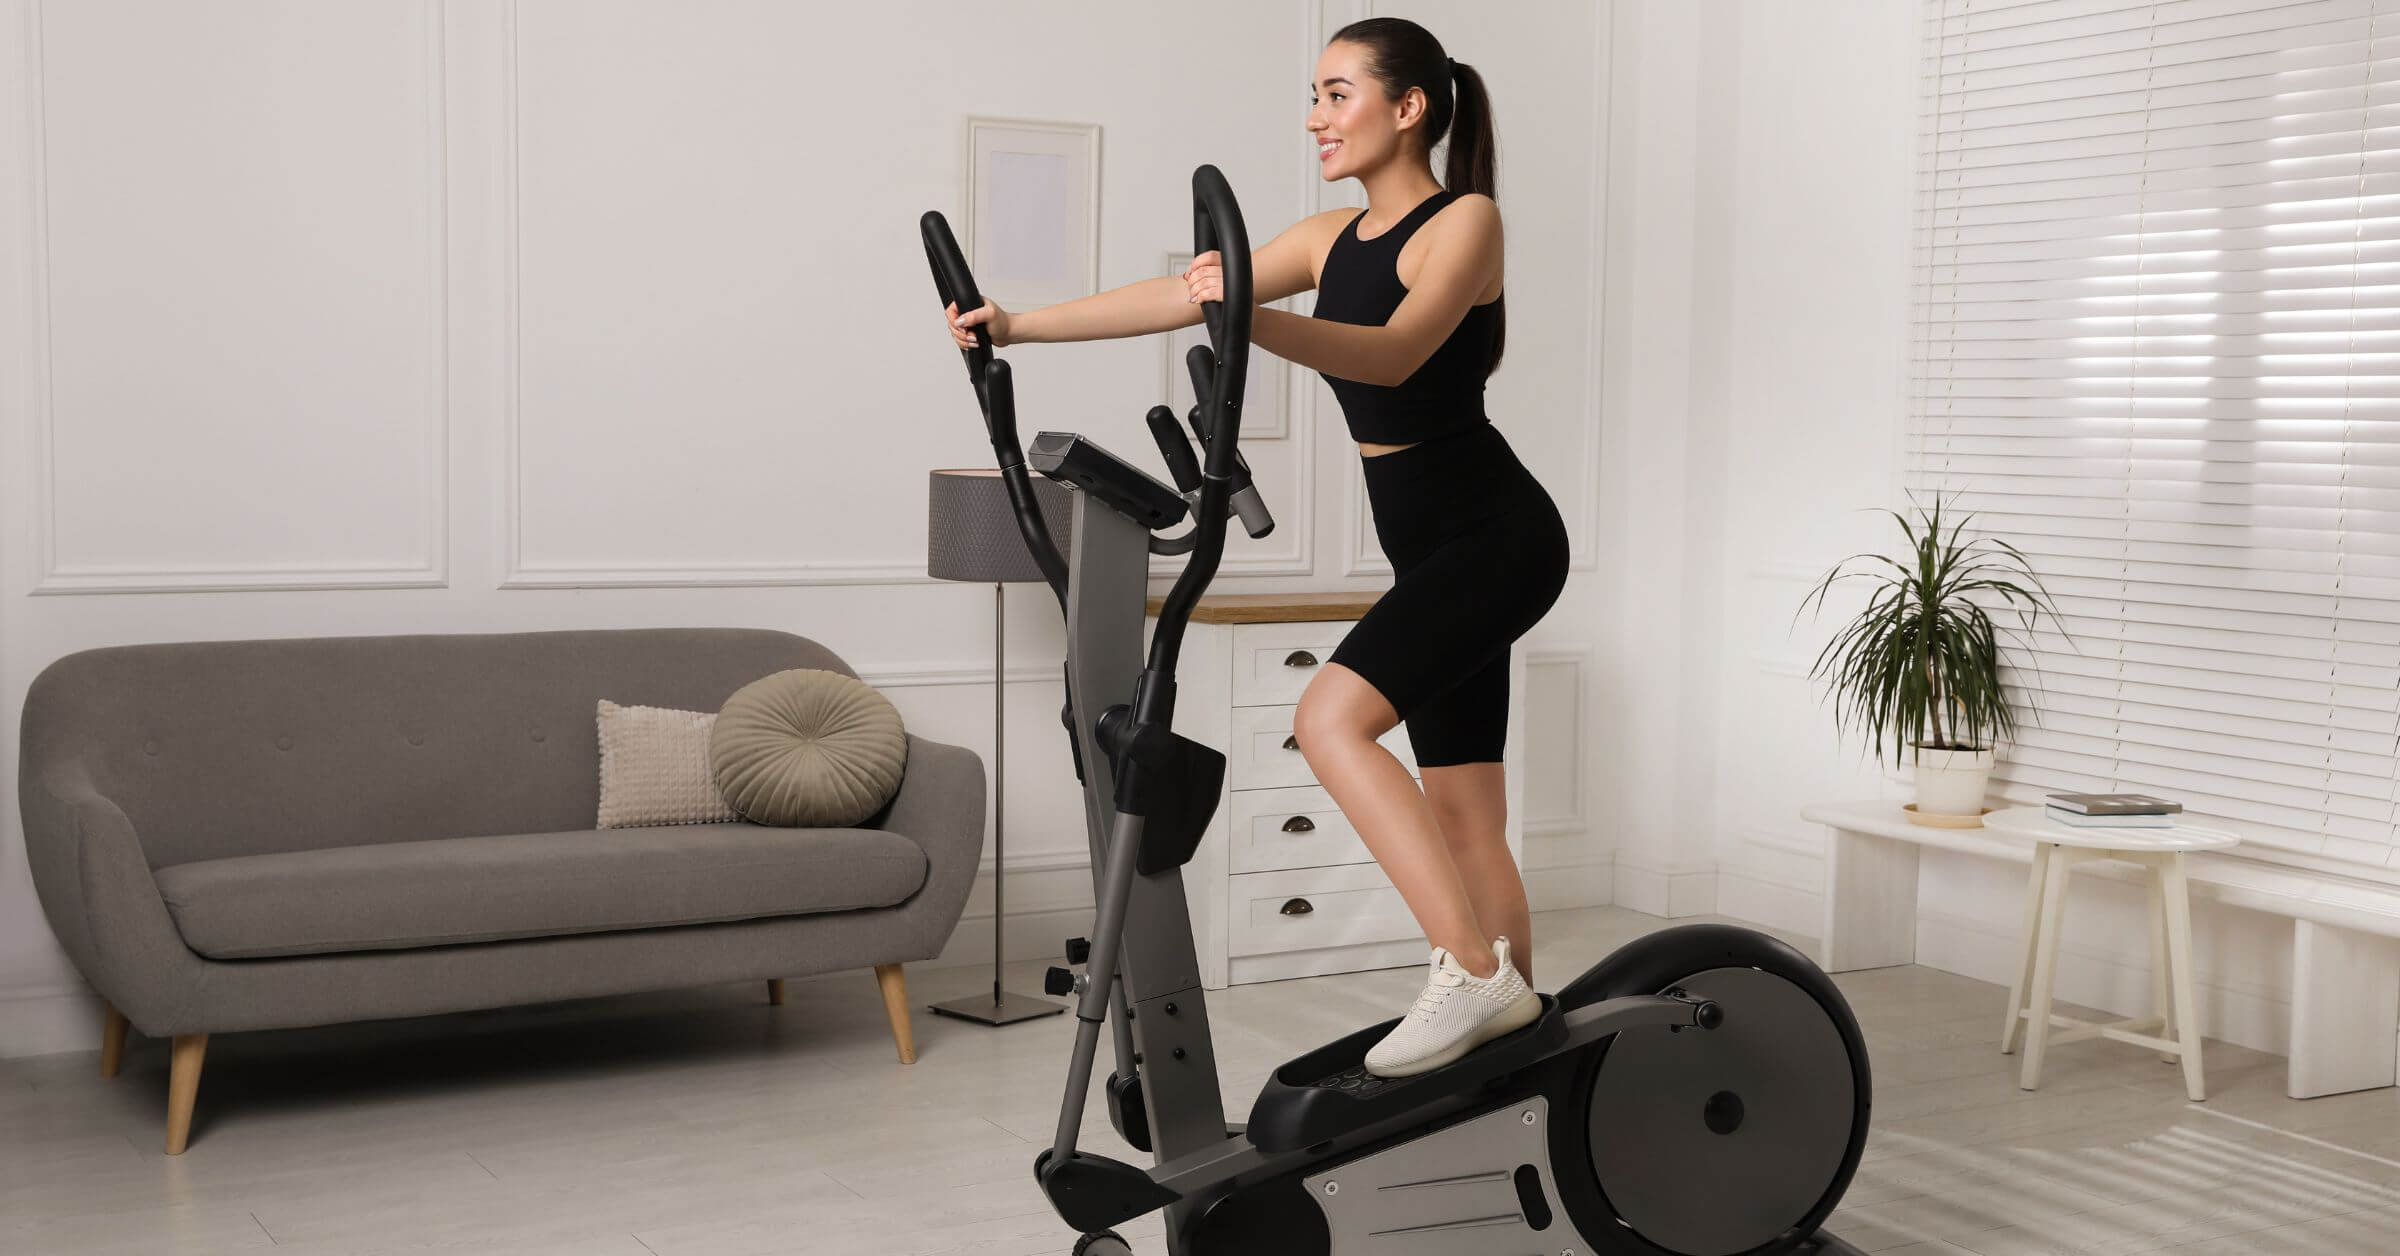 15 to 20 minutes is enough to exercise with ellipticals